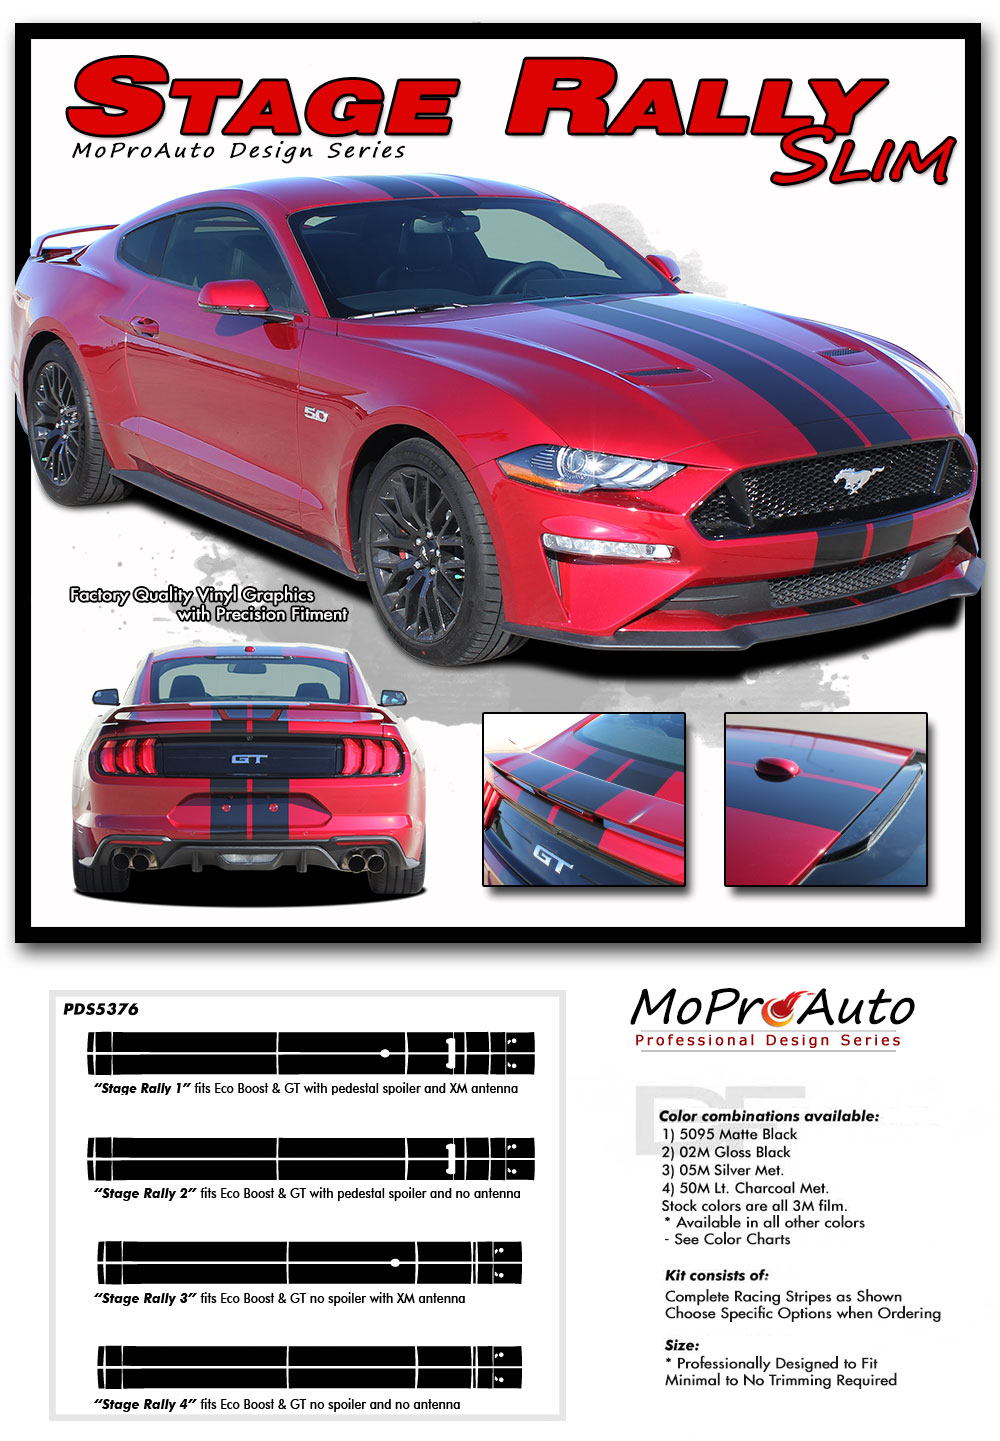 2018 2019 2020 2021 2022 2023 STAGE RALLY SLIM OEM Style Racing Stripes for Ford Mustang - MoProAuto Pro Design Series Vinyl Graphics, Stripes and Decals Kit